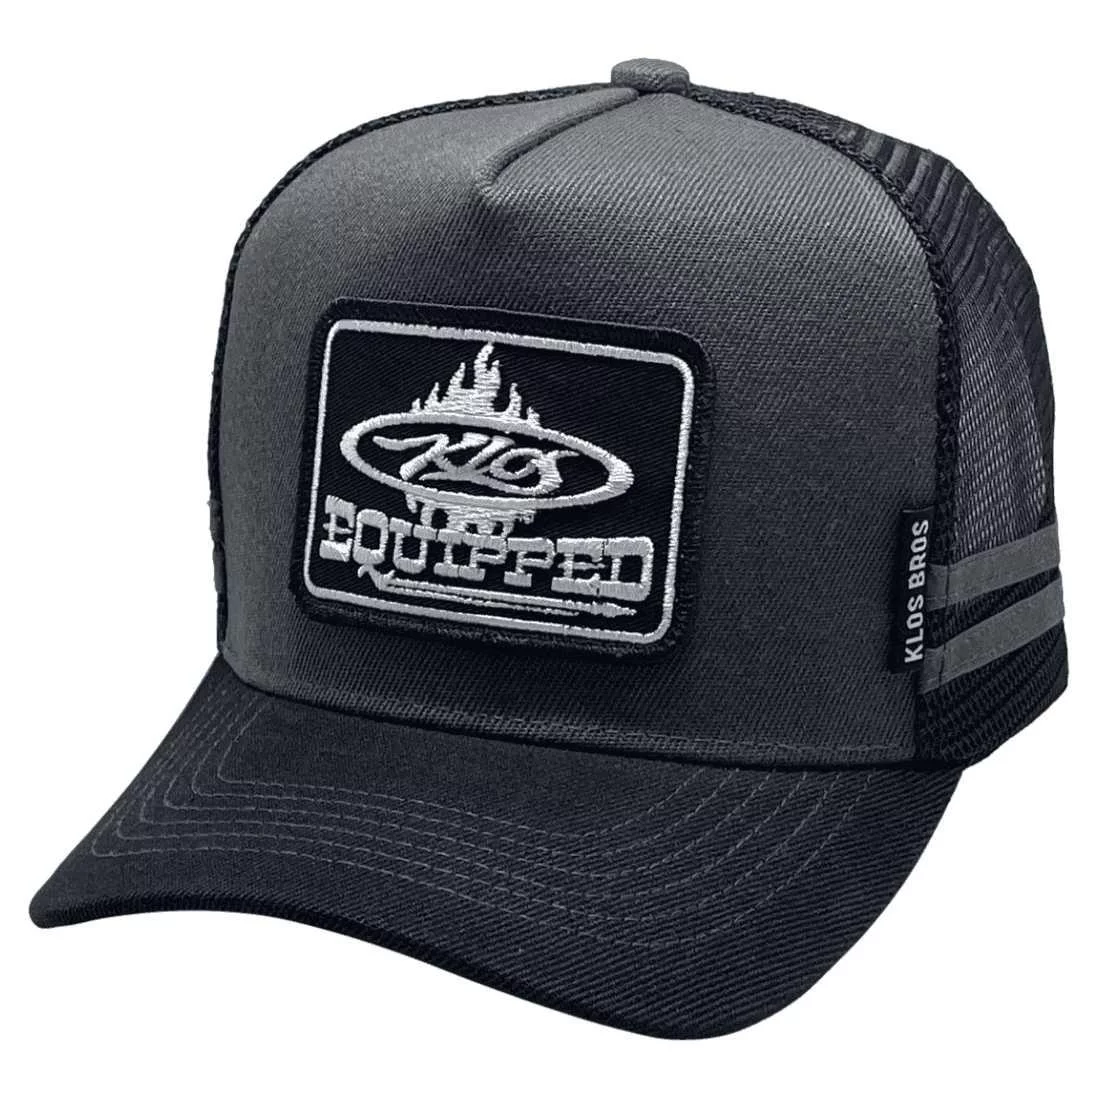 Klos Equipped High Profile Basic Aussie trucker Hat - Charcoal/Black Acrylic High Profile